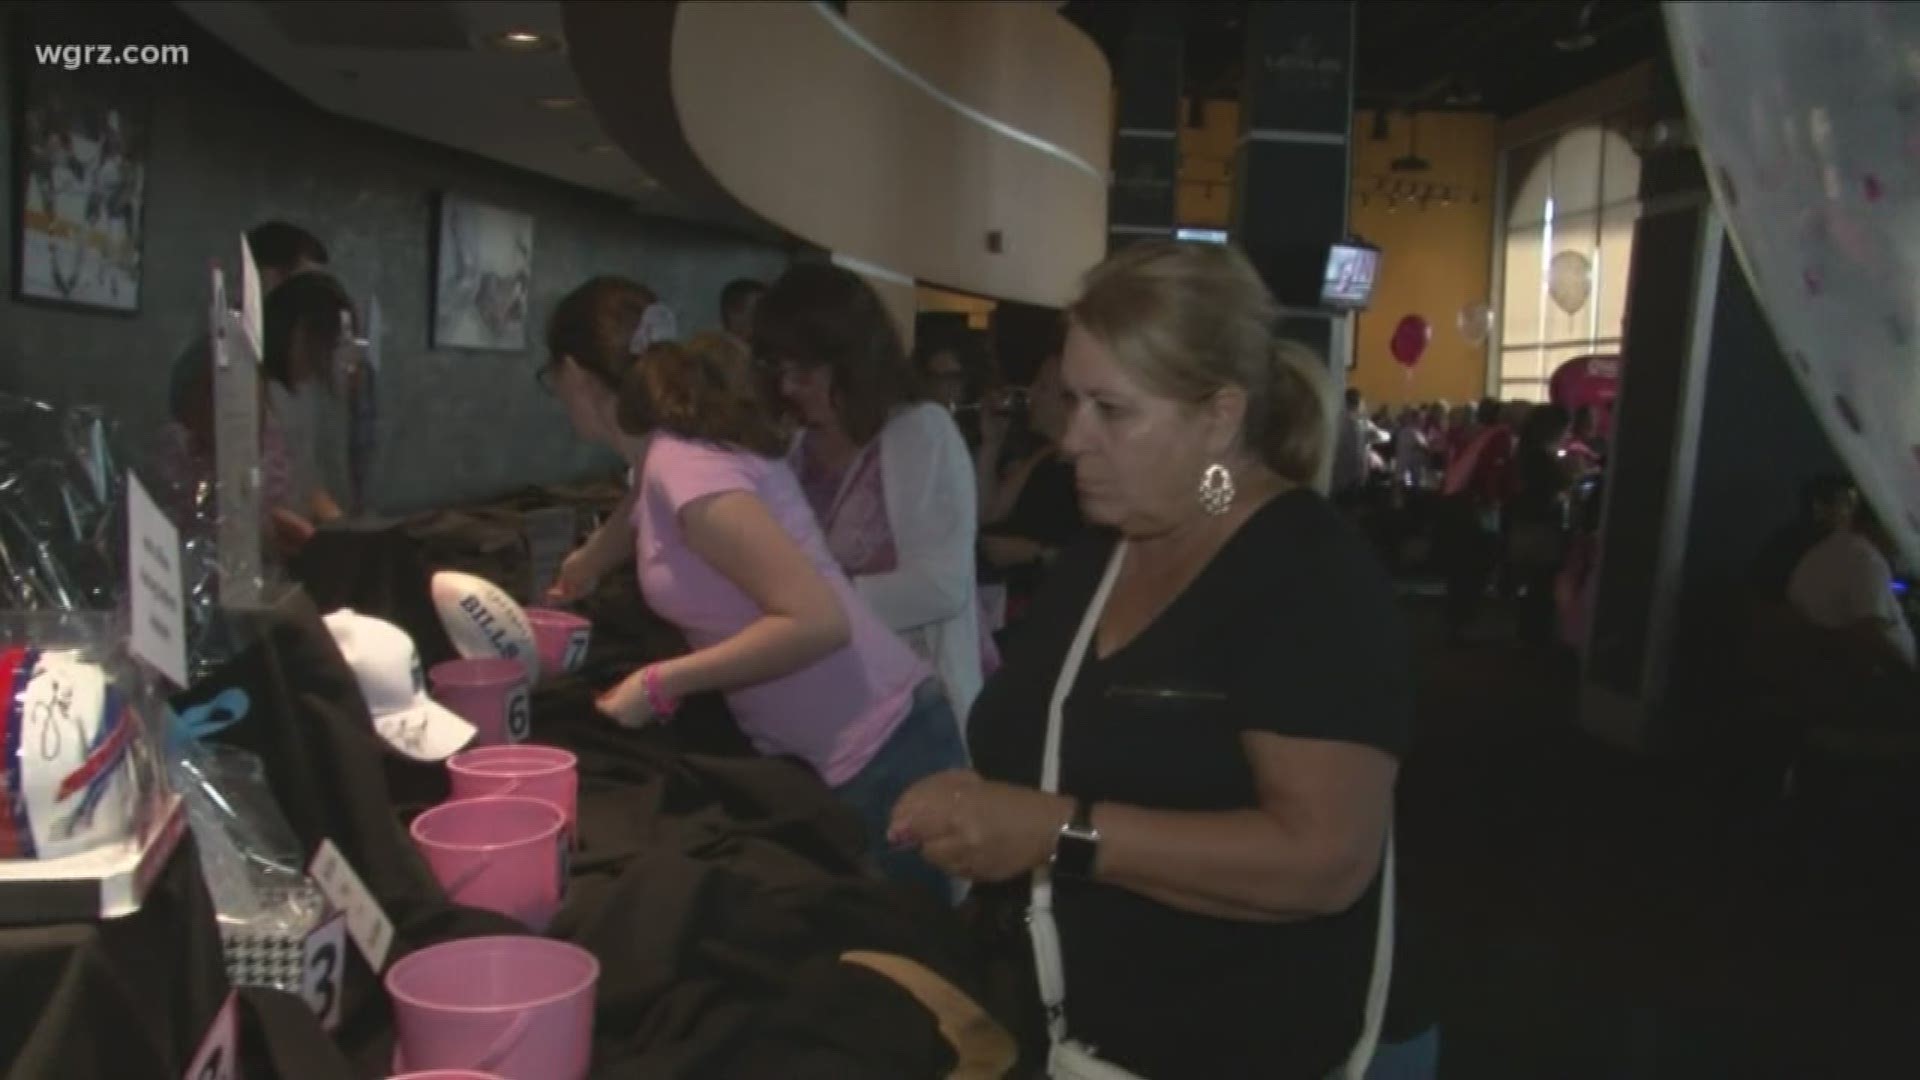 The Making Strides Against Breast Cancer event raises money for breast cancer research